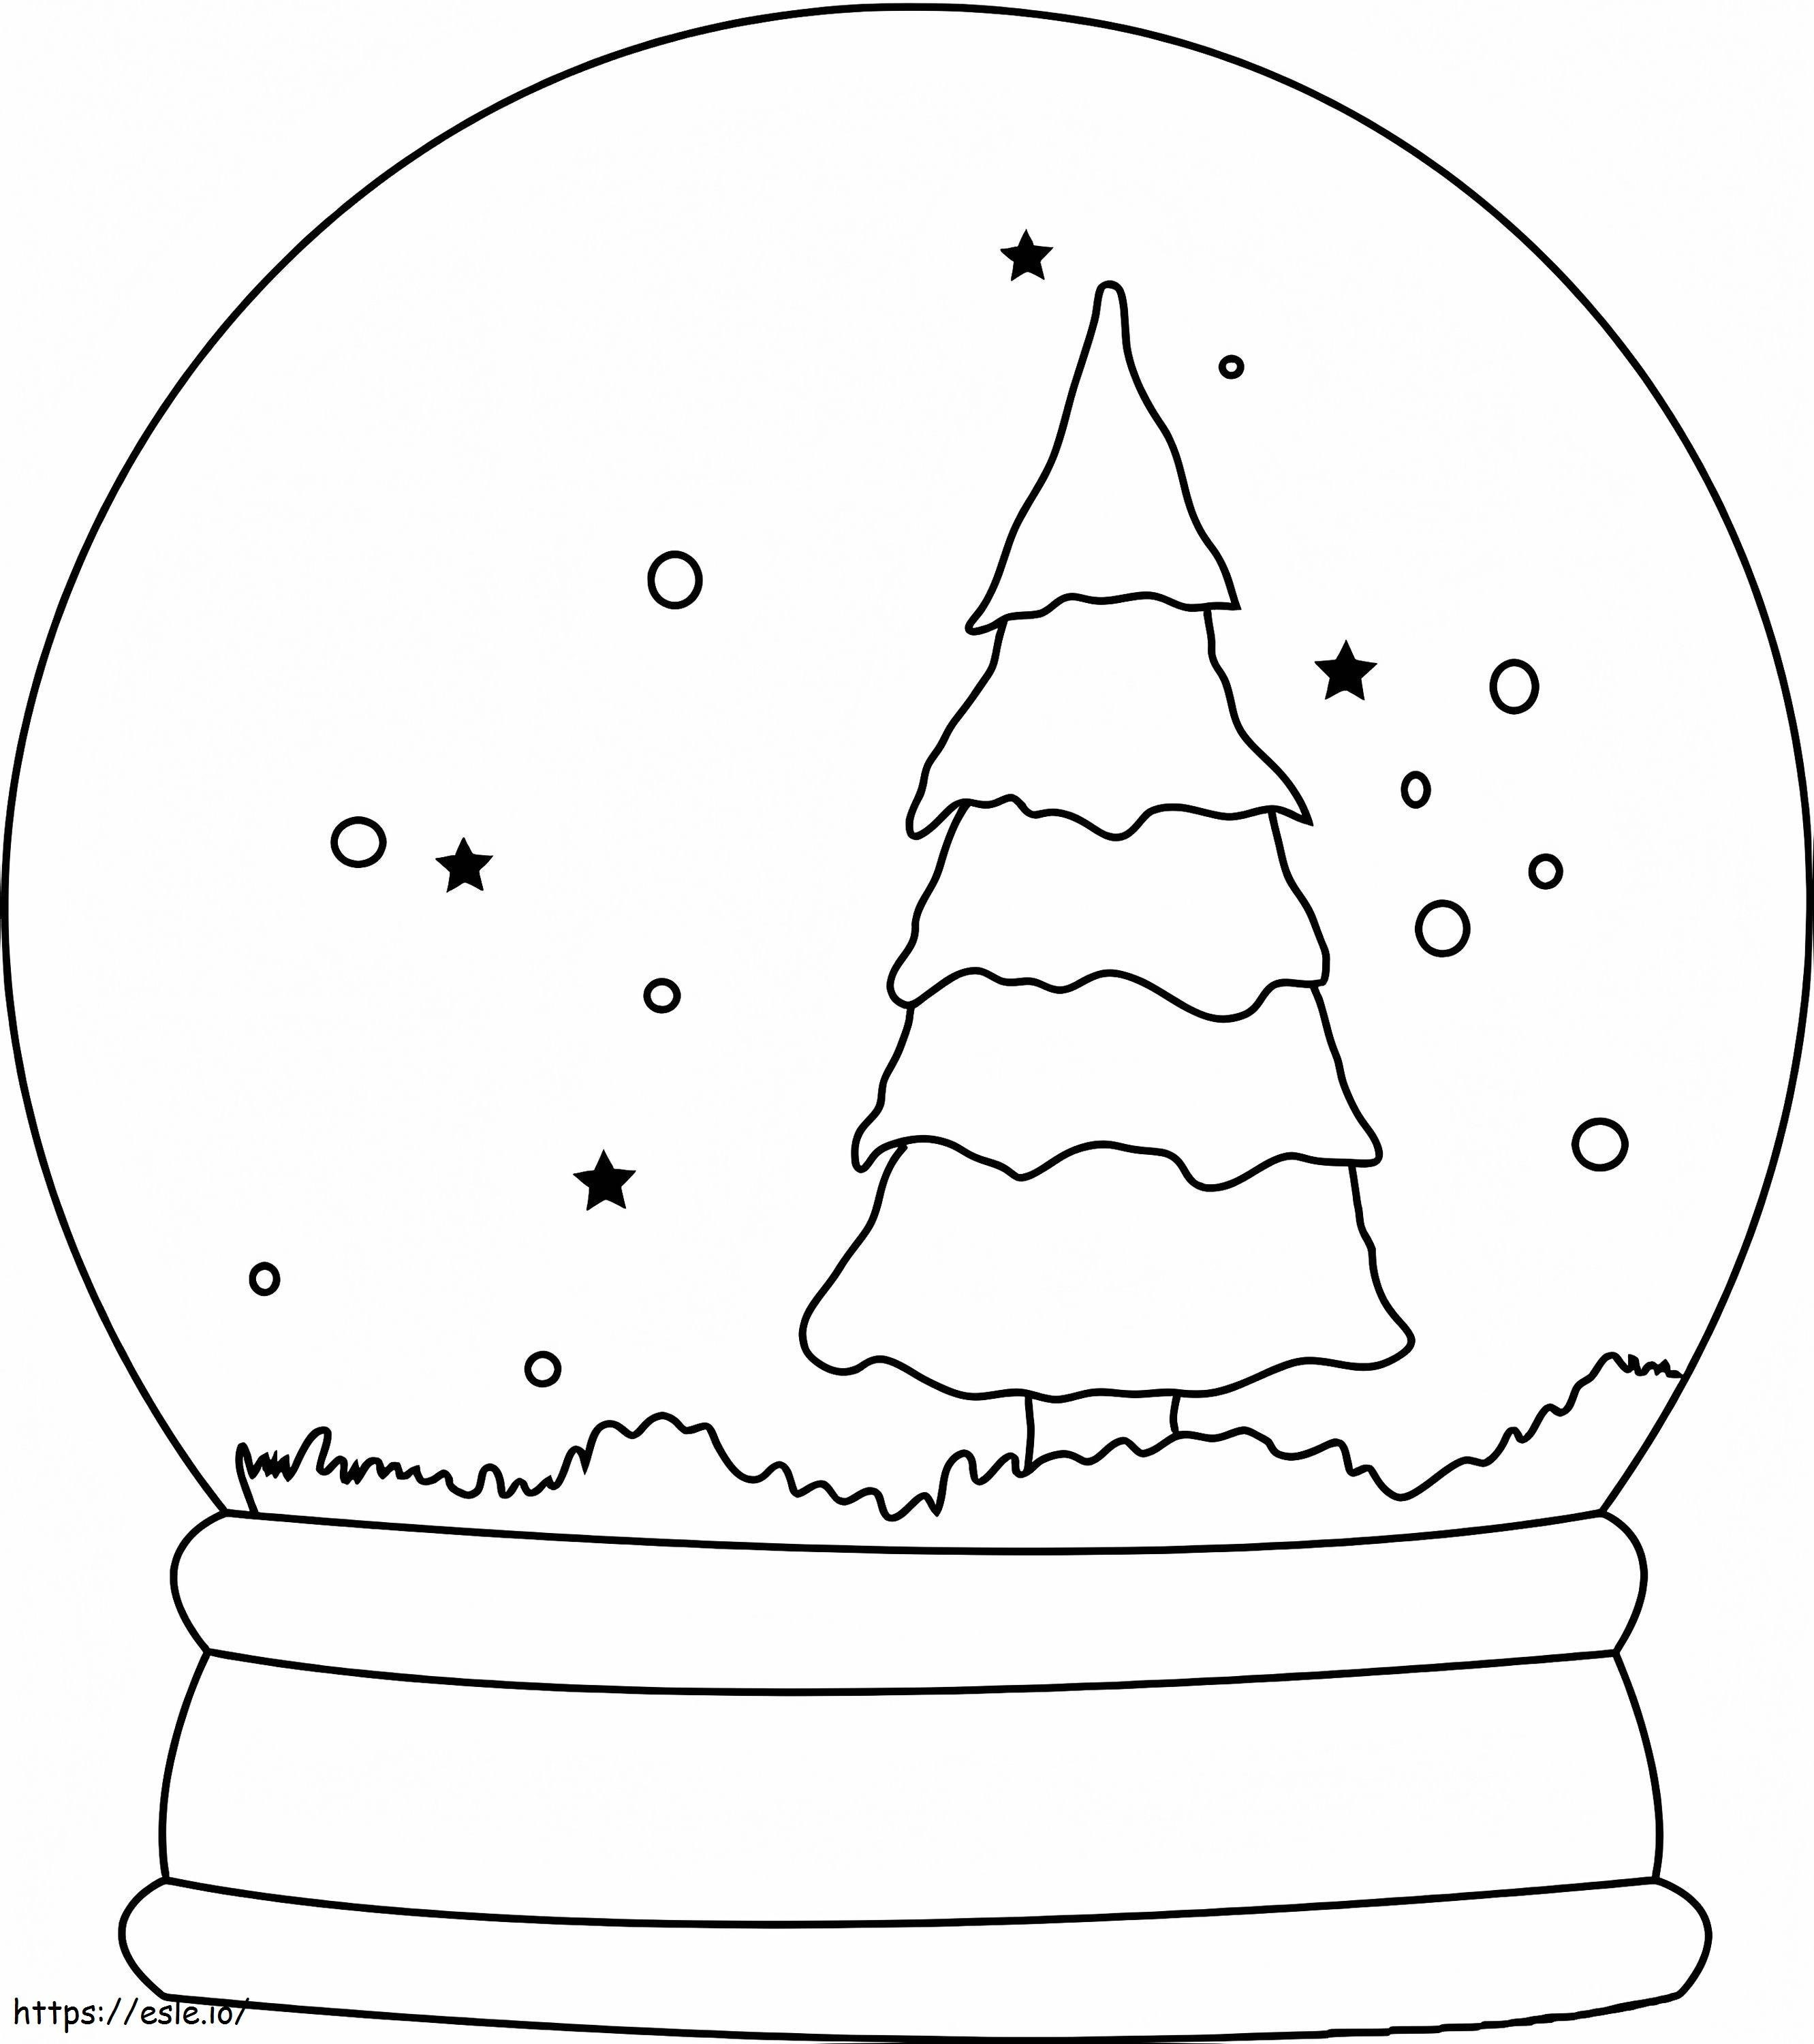 Easy Snow Globe With Christmas Tree coloring page